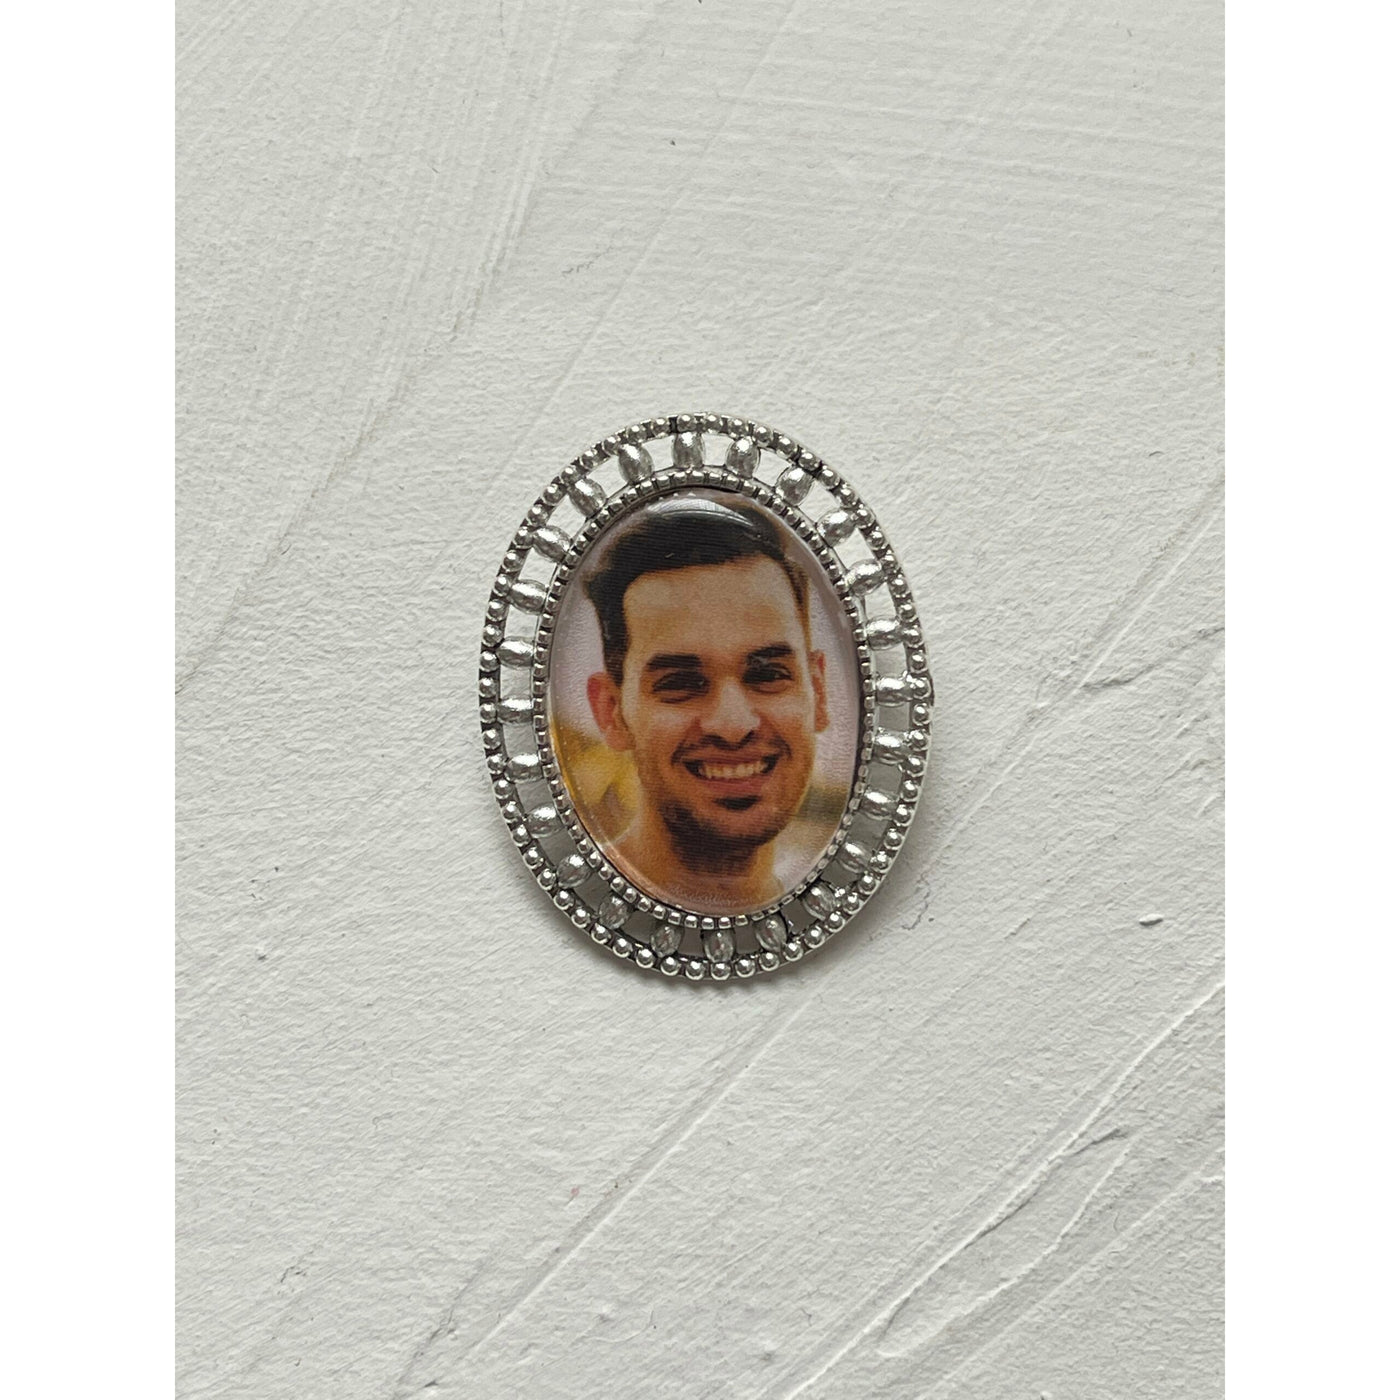 A memorial brooch or memorial pin in the design called Brogue, showing a photo of a young man. The pin is placed on a neutral white textured background and is intended to be pinned to a wedding bouquet or wedding jacket to include a deceased relative on your wedding day.